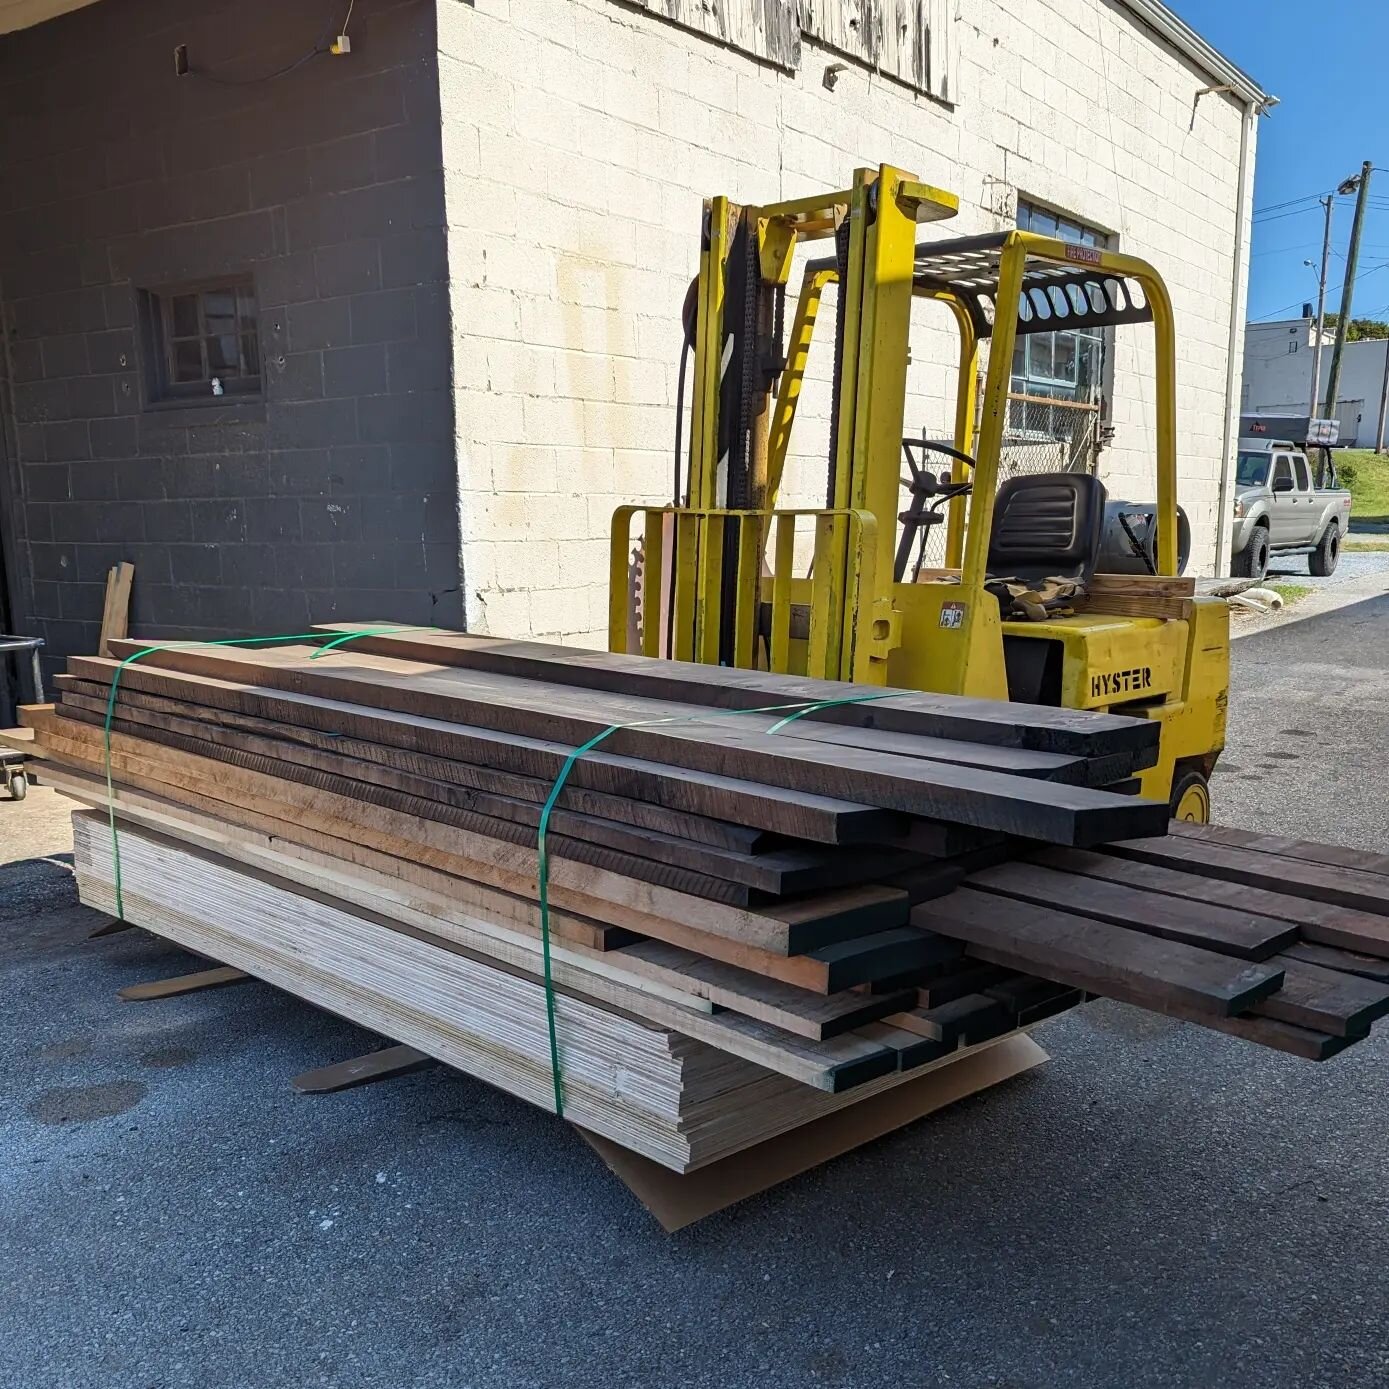 I can feel it in the air - fall is coming.

It isn't the temperature drop that let's me know summer is ending. It's the fact that people are getting back into their woodshops. Lumber orders are ramping back up.

Yesterday was a refill on walnut and c